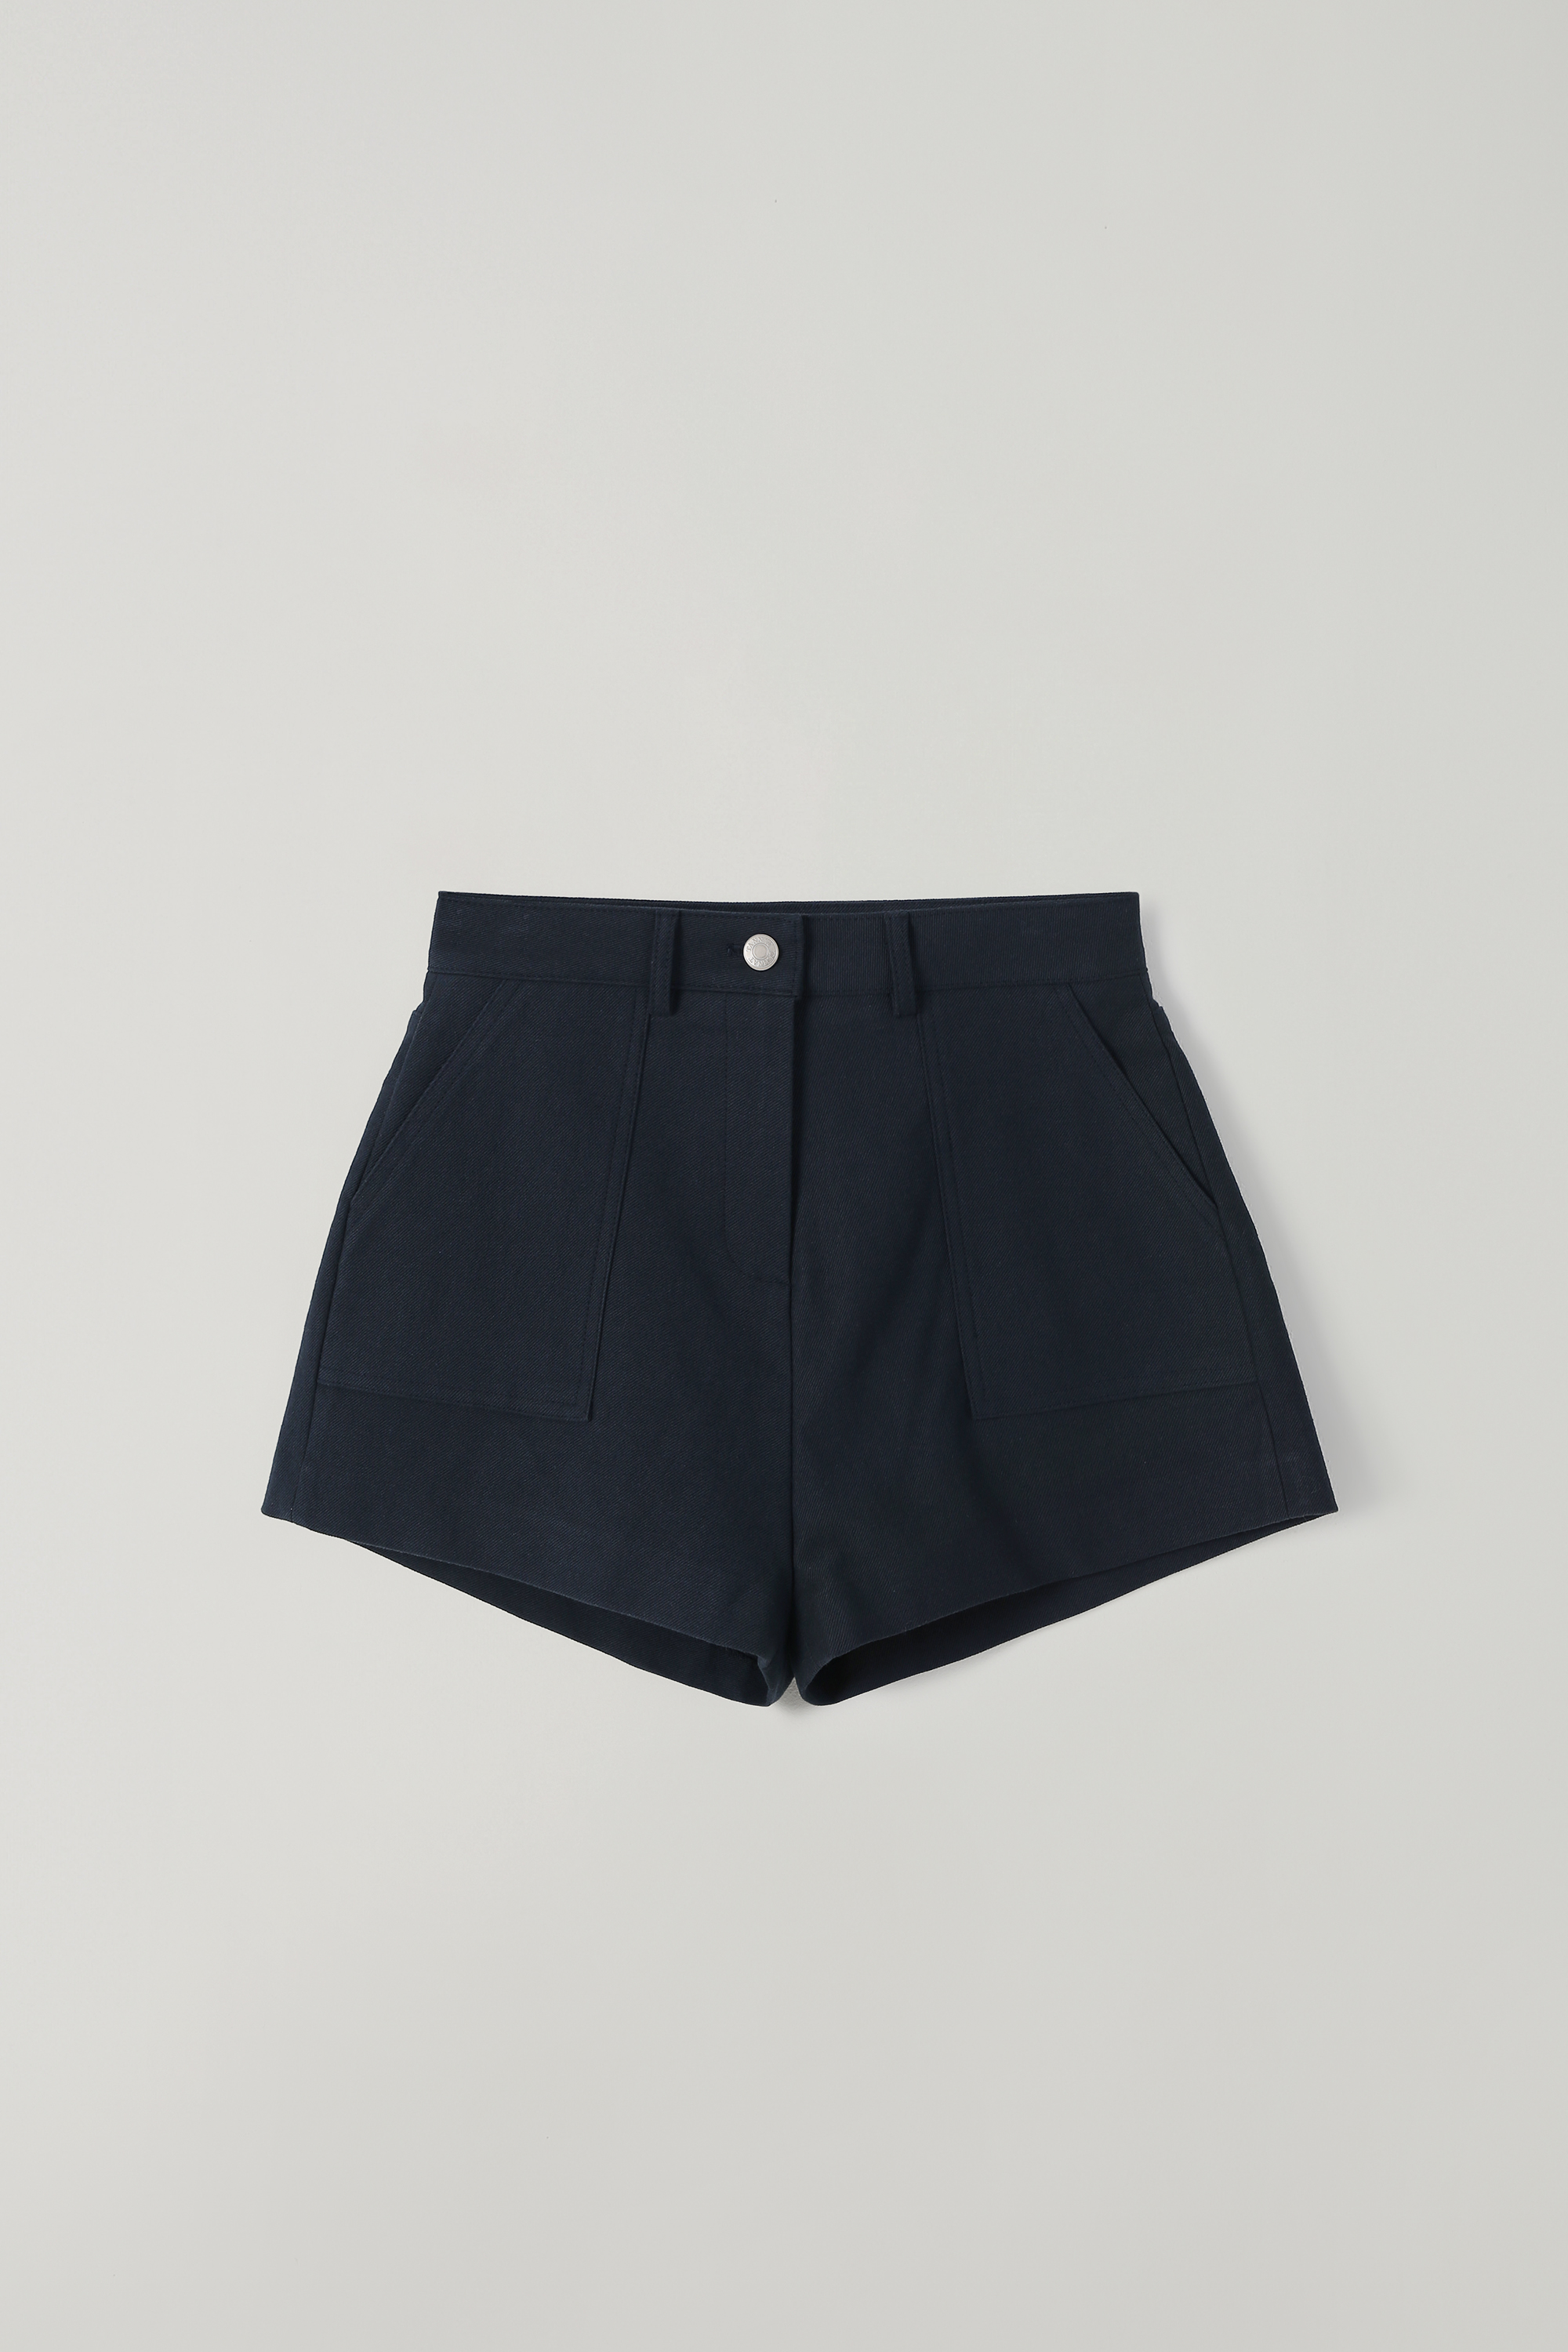 (3rd re-stock) T/T Pocket cotton shorts (navy)